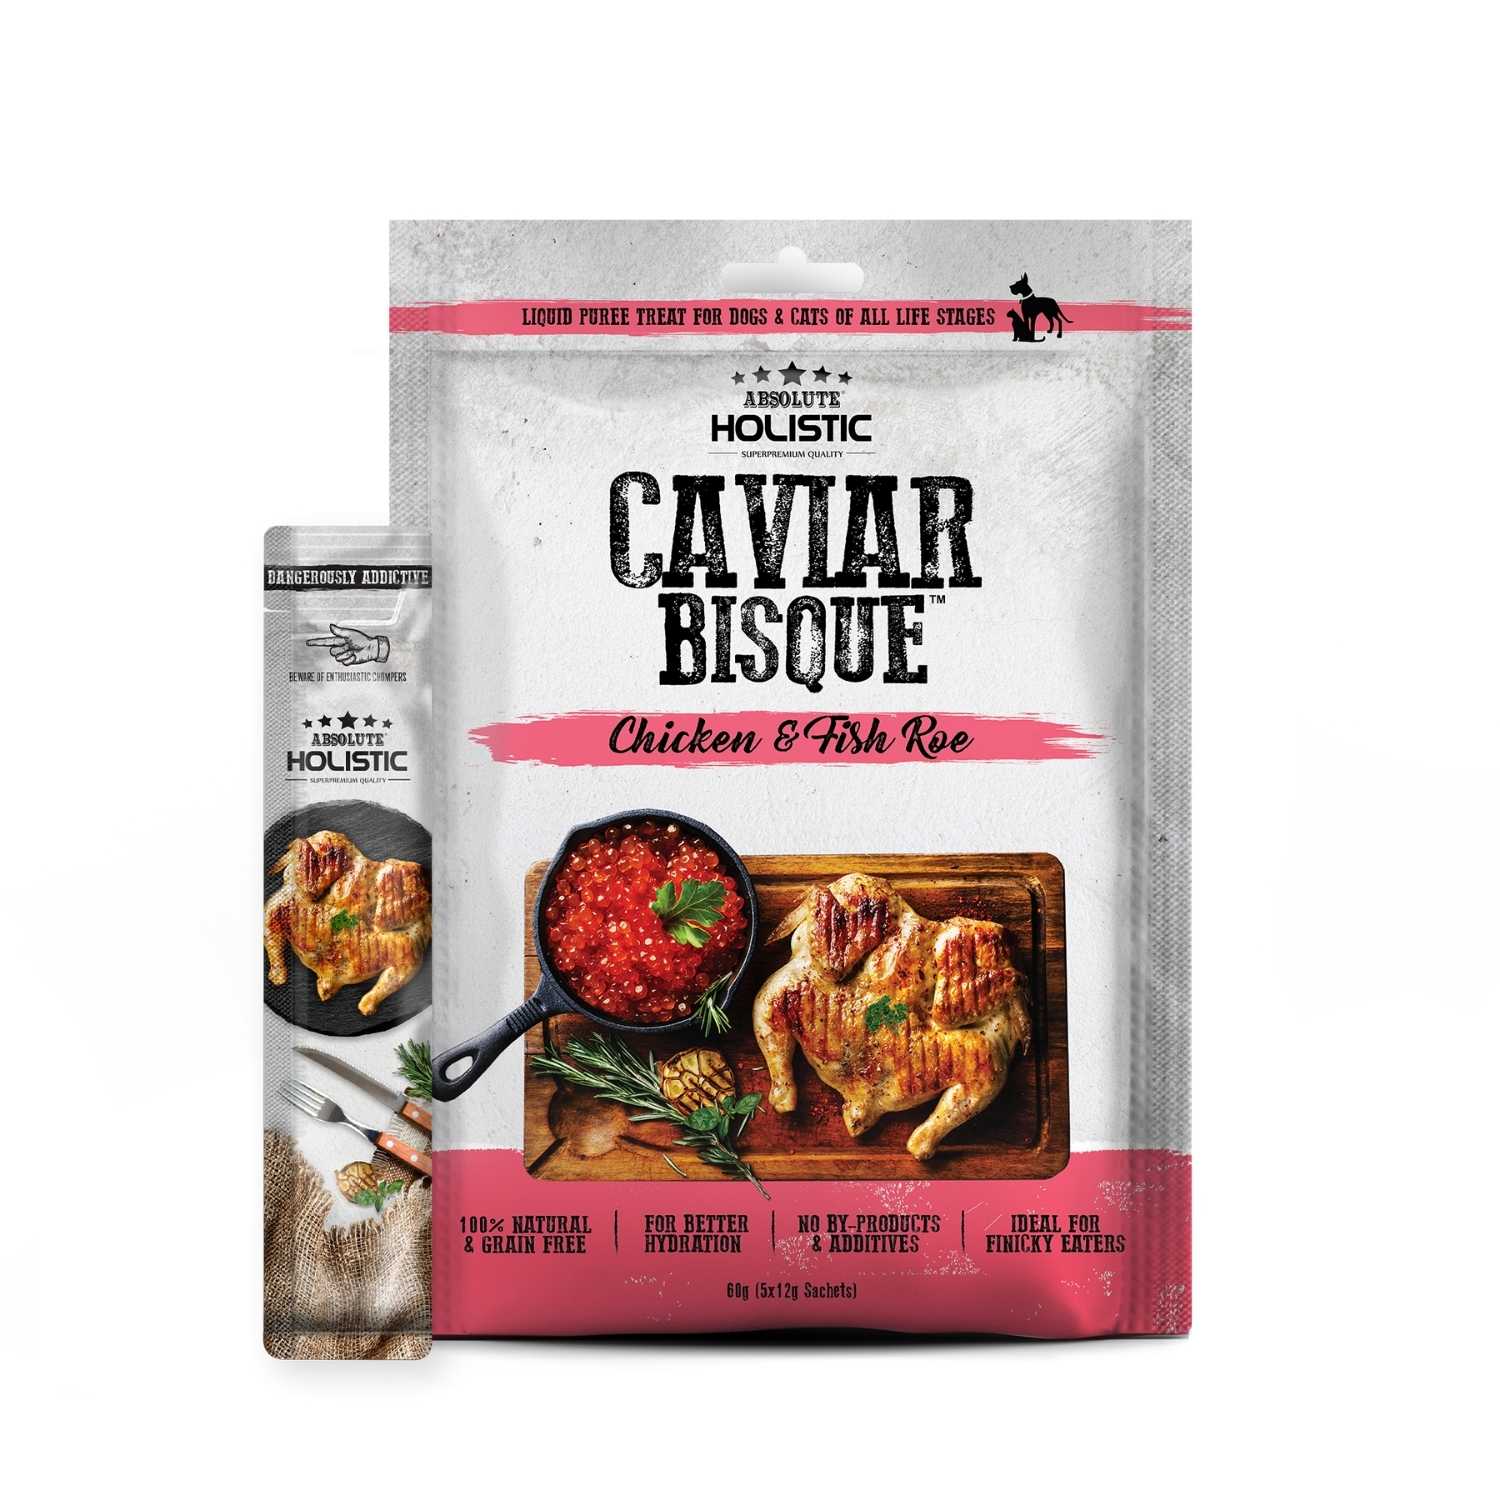 Absolute Holistic - Caviar Bisque (chicken & fish roe) - Dog & Cat 5x12g Treats